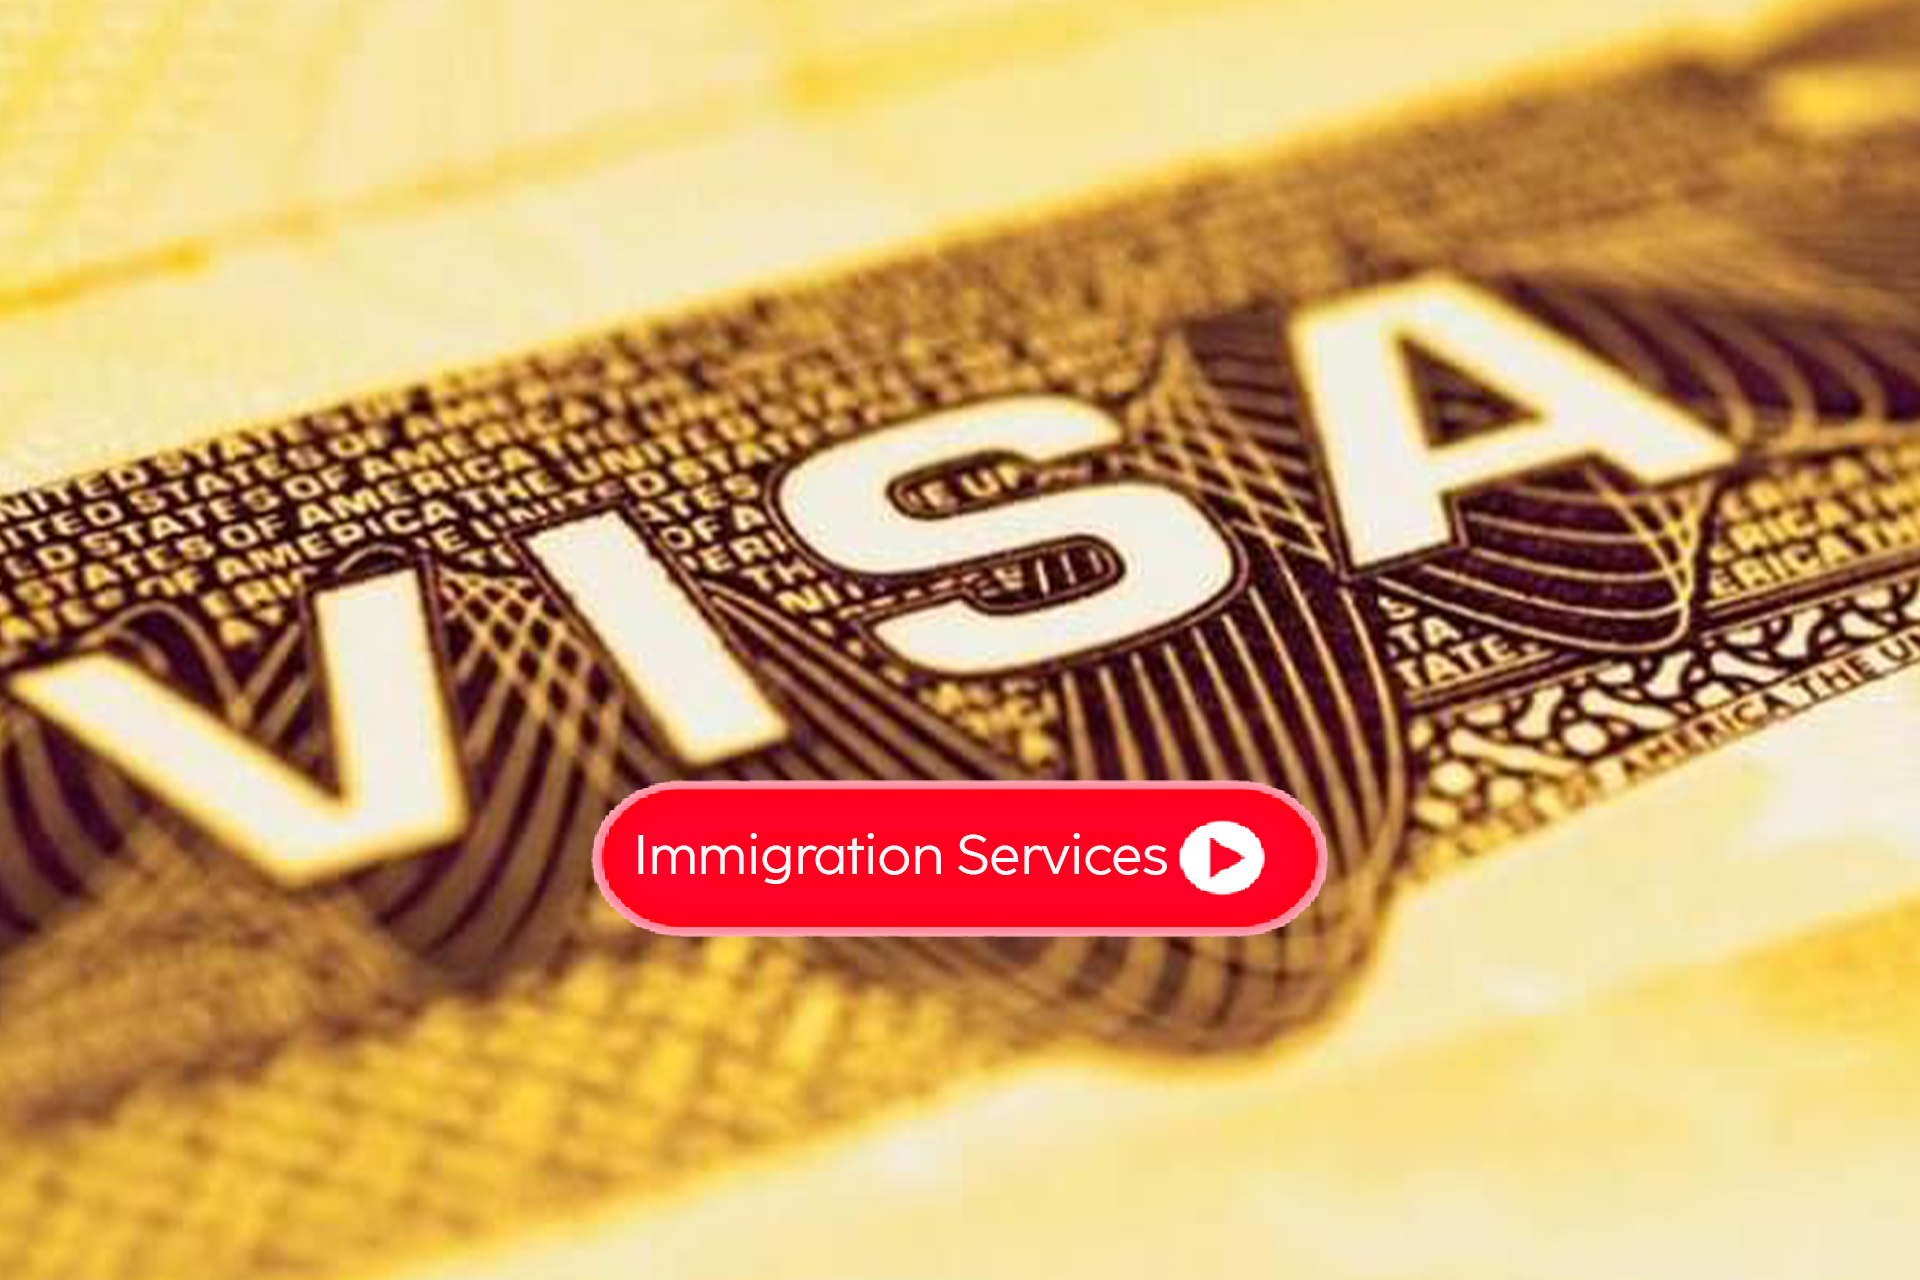 You are currently viewing Immigration Services: Golden Visa Now in Effect in Indonesia, Allowing Foreign Investors to Stay for up to 10 Years!